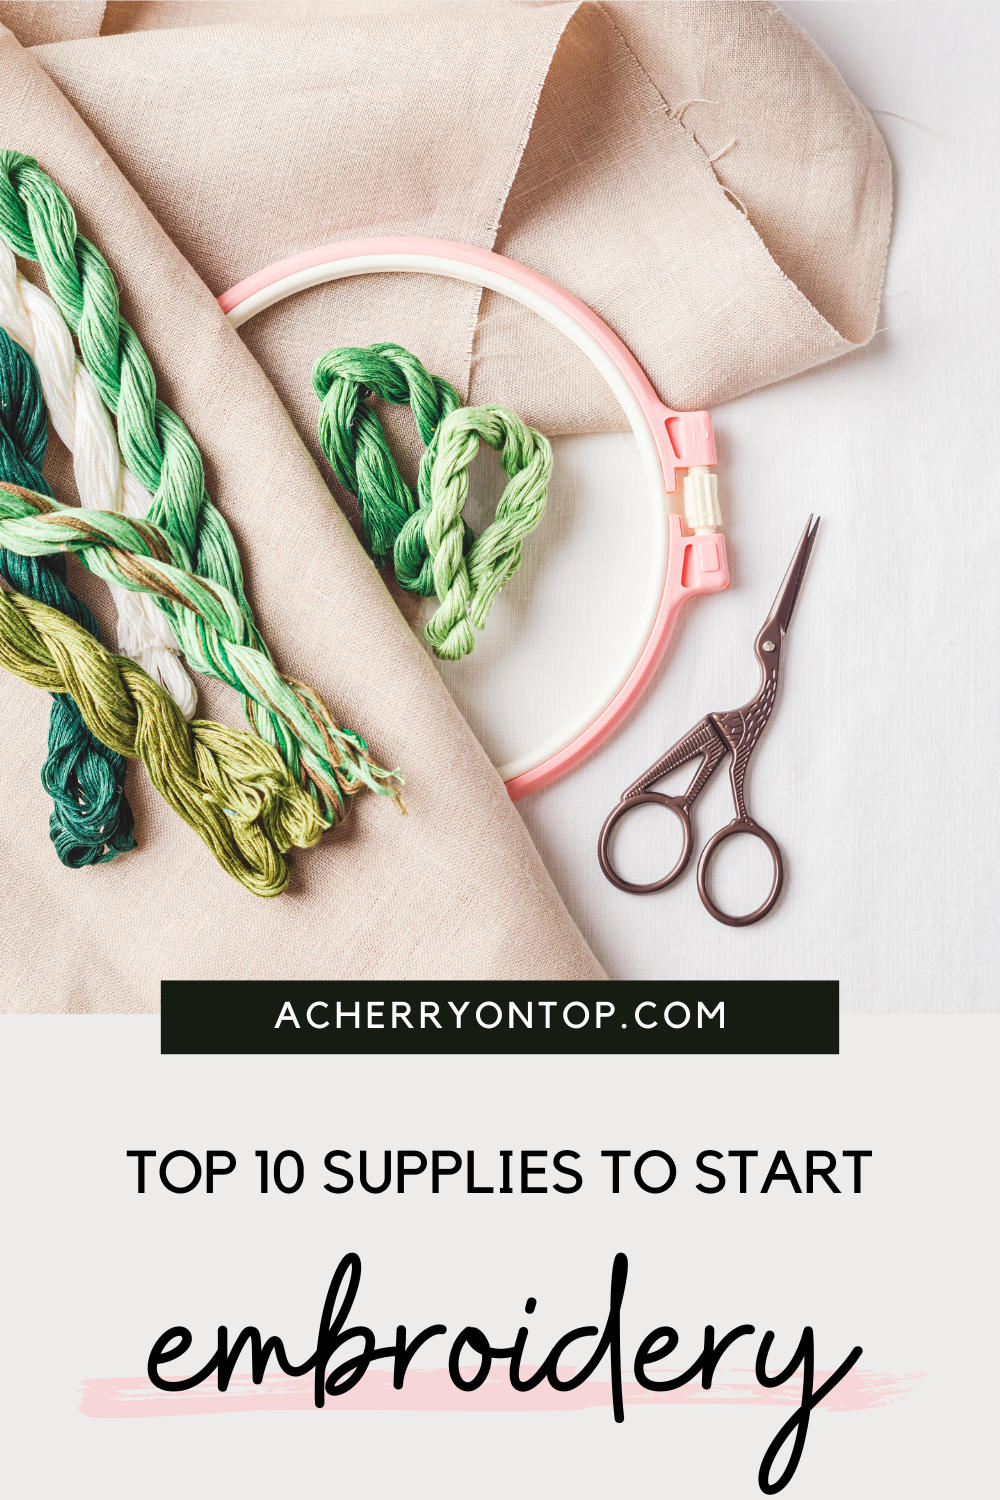 Top 10 Supplies To Start Embroidery